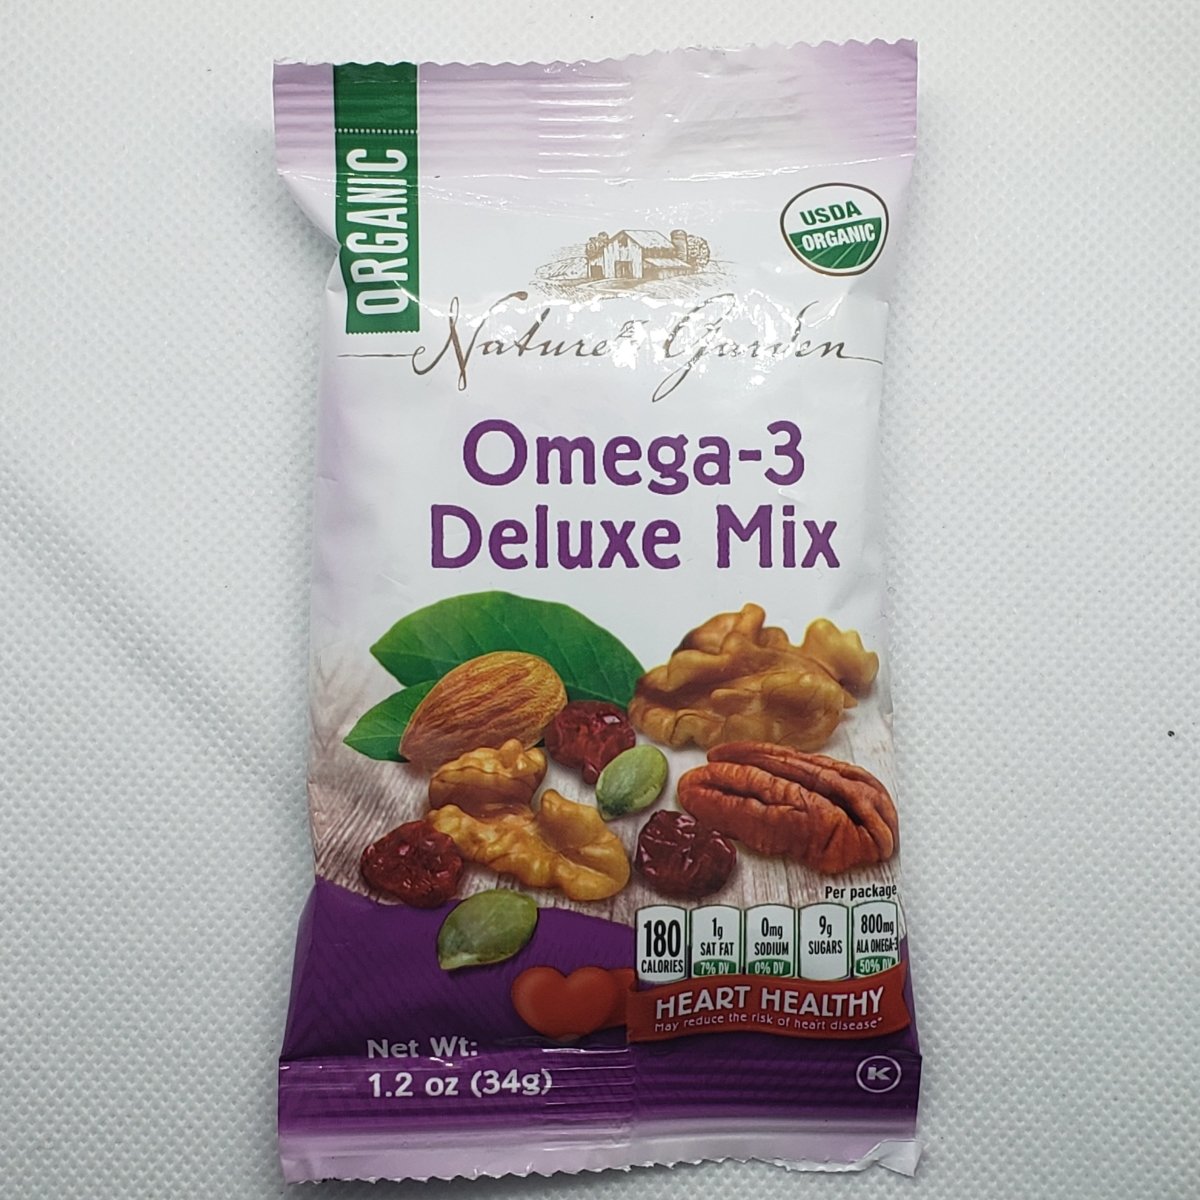 Omega-3 Deluxe Mix - Snack - 1.2oz